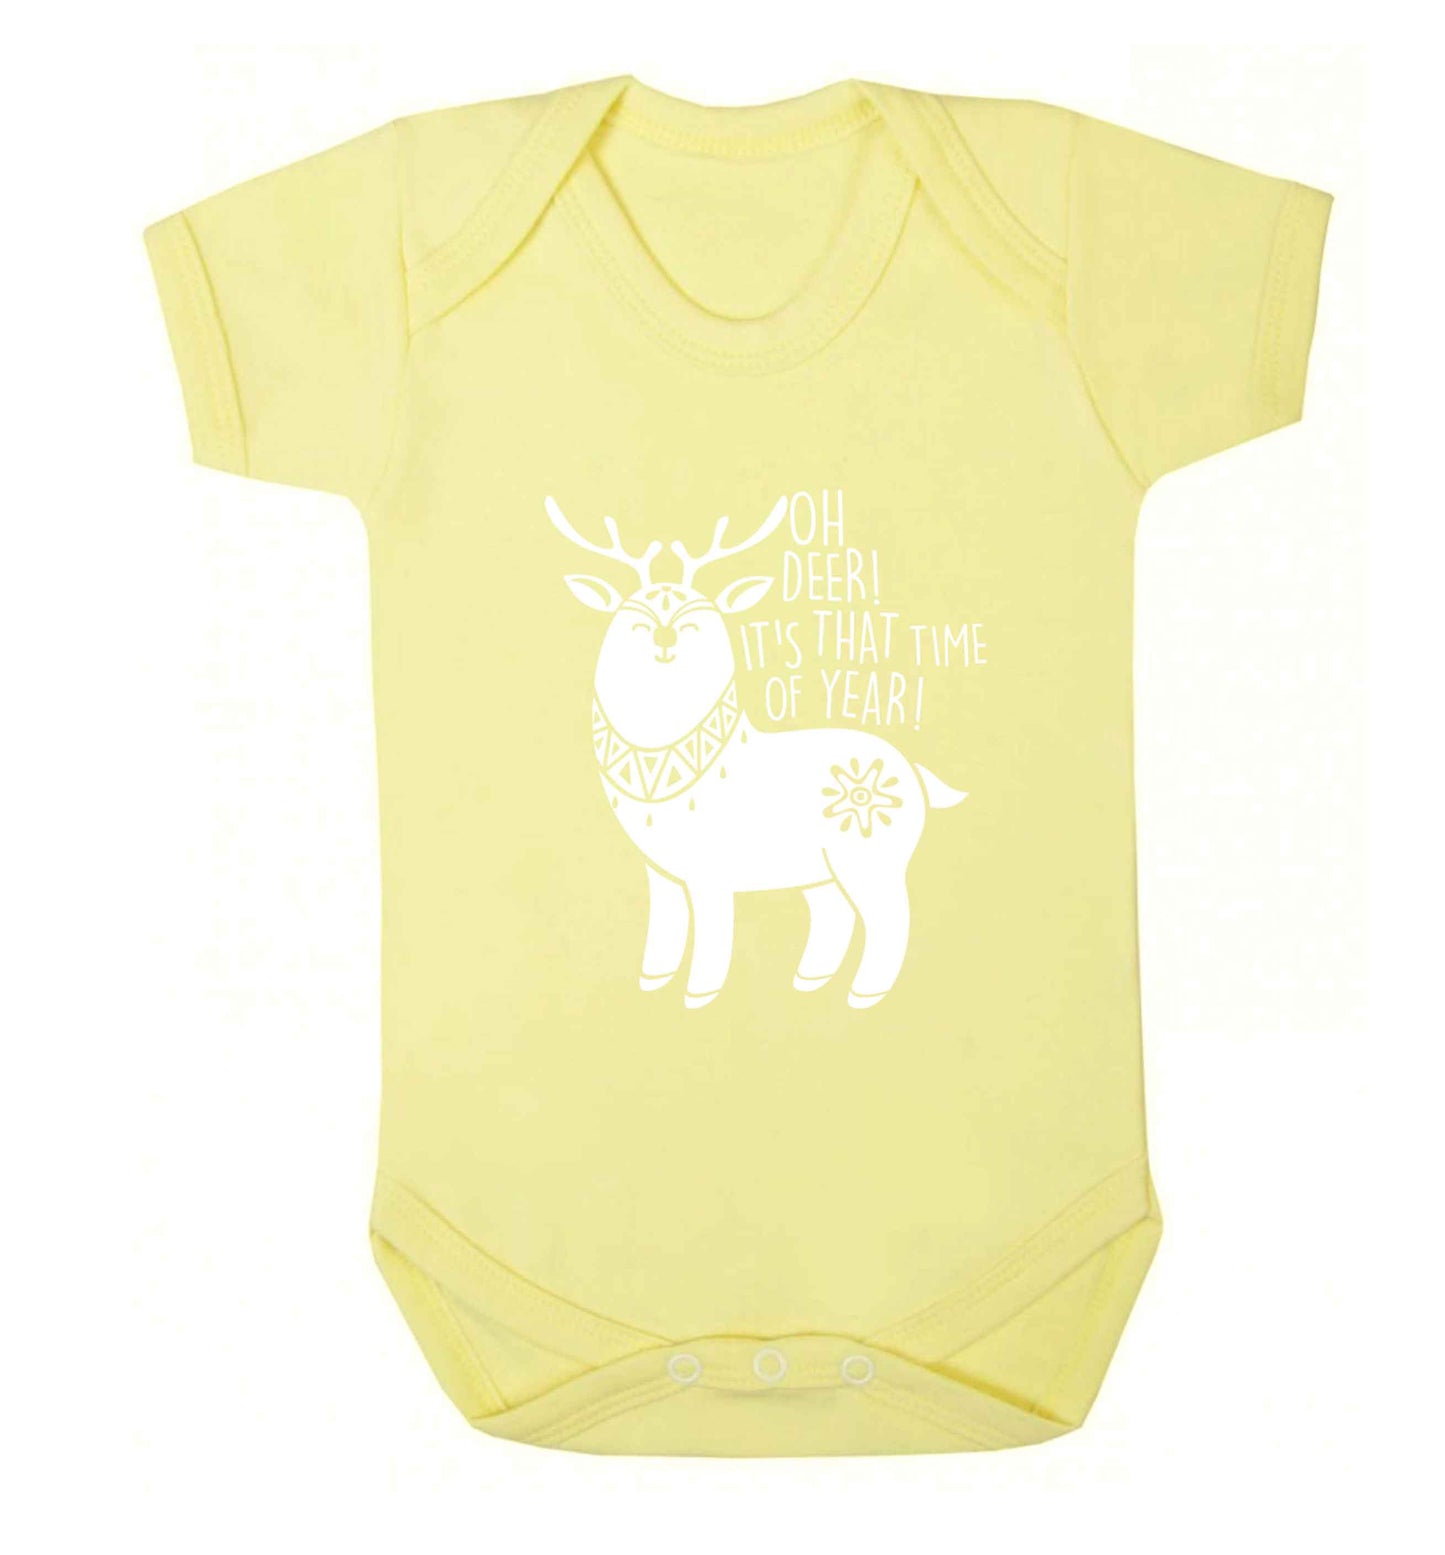 Oh dear it's that time of year Baby Vest pale yellow 18-24 months